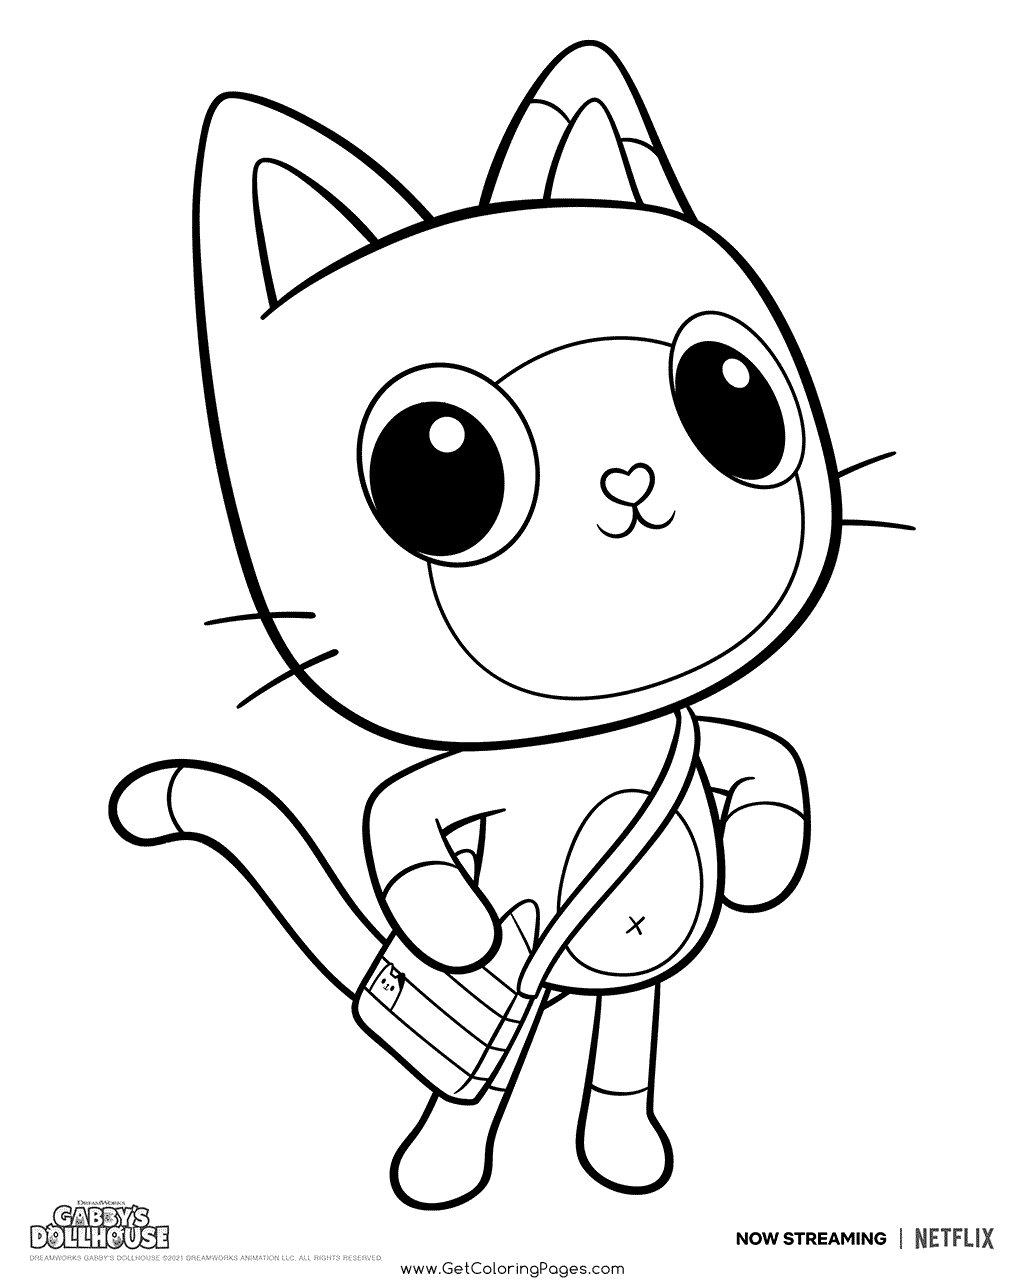 Pandy Paws Gabby's Dollhouse Coloring Pages - Get Coloring Pages